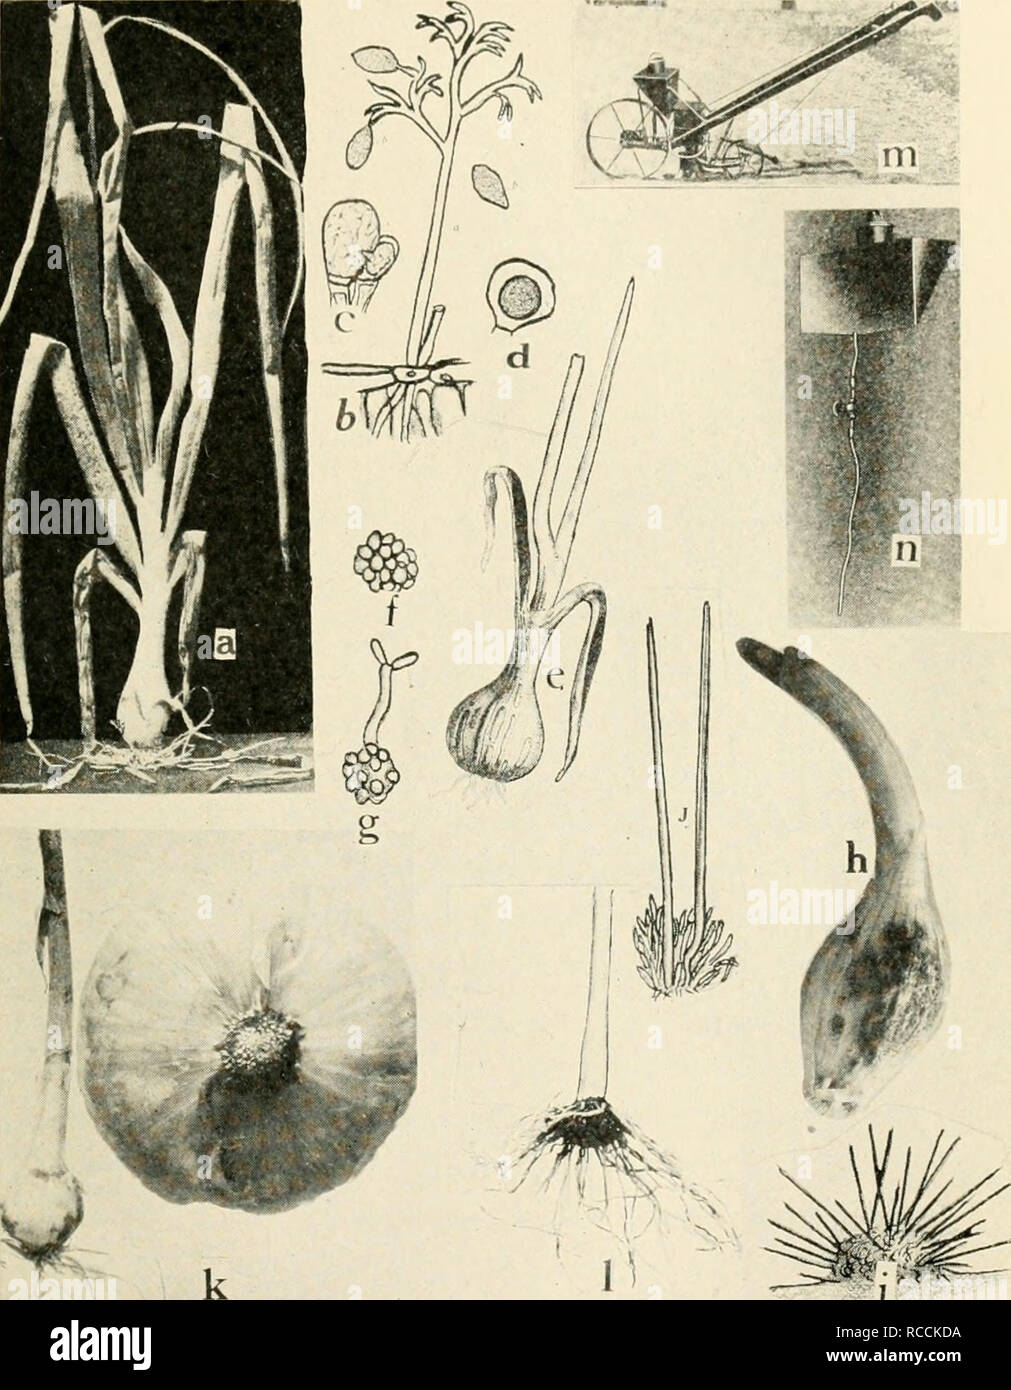 . Diseases of truck crops and their control. Vegetables. , n ^i;&quot; Fig. 54. Onion Diseases. a. Downy mildew, b. mature conidiophore and conidia of Peronospora schleideni, c. fertilization of the female oogonium by the male antheridium, d. oospore (a. to d. after Wh^tzel), e. onion smut, /. spore ball of the smut fungus, g. spore germina- tion, formation of sporidia at x, h. Vermicularia anthracnose, i. section through acervulis of Vermicularia cirdnans. j. setae and spore formation in V. circinans {e. to g., i. and j. after Thaxter), k. pink root of onion, healthy and diseased bulbs, I. pi Stock Photo